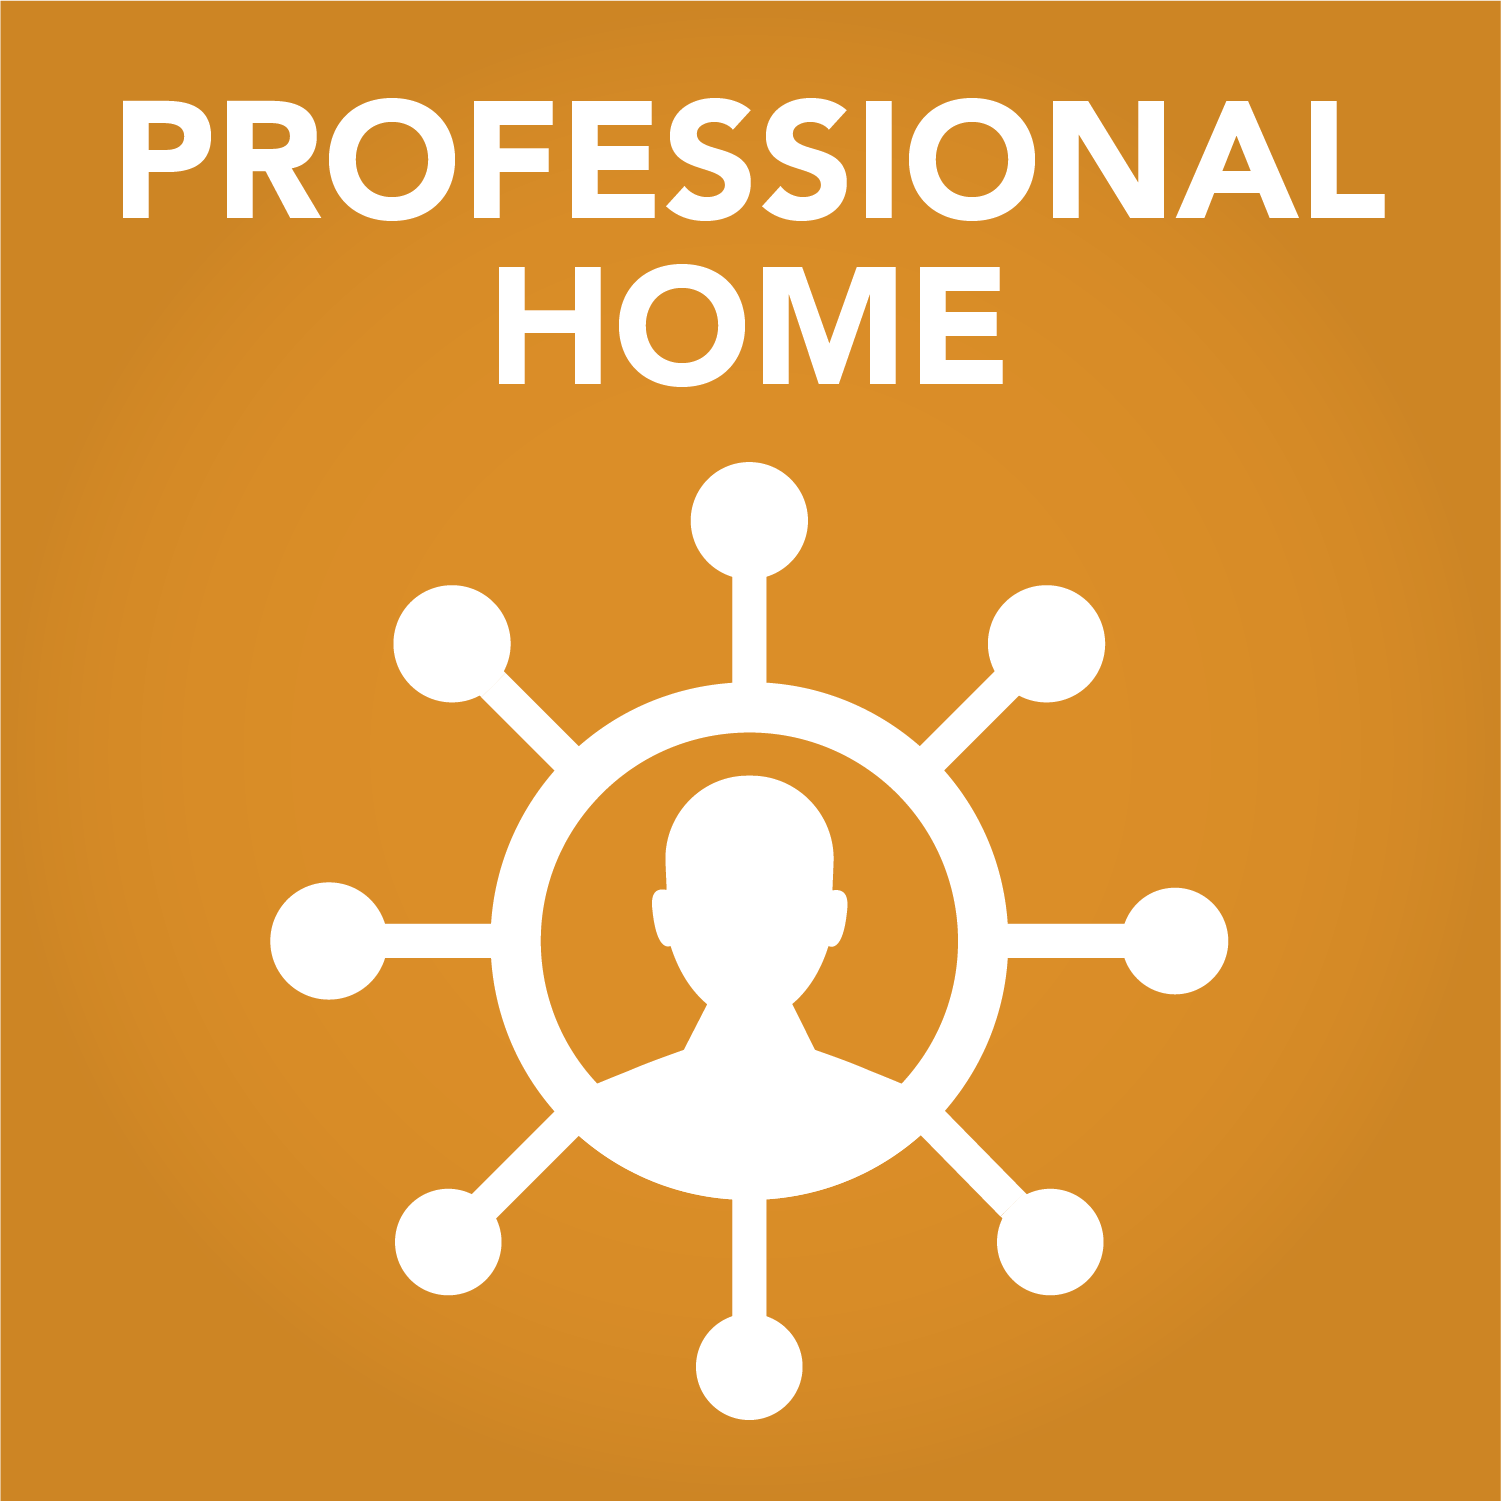 INCREASE RELEVANCE AS THE CV PROFESSIONAL HOME